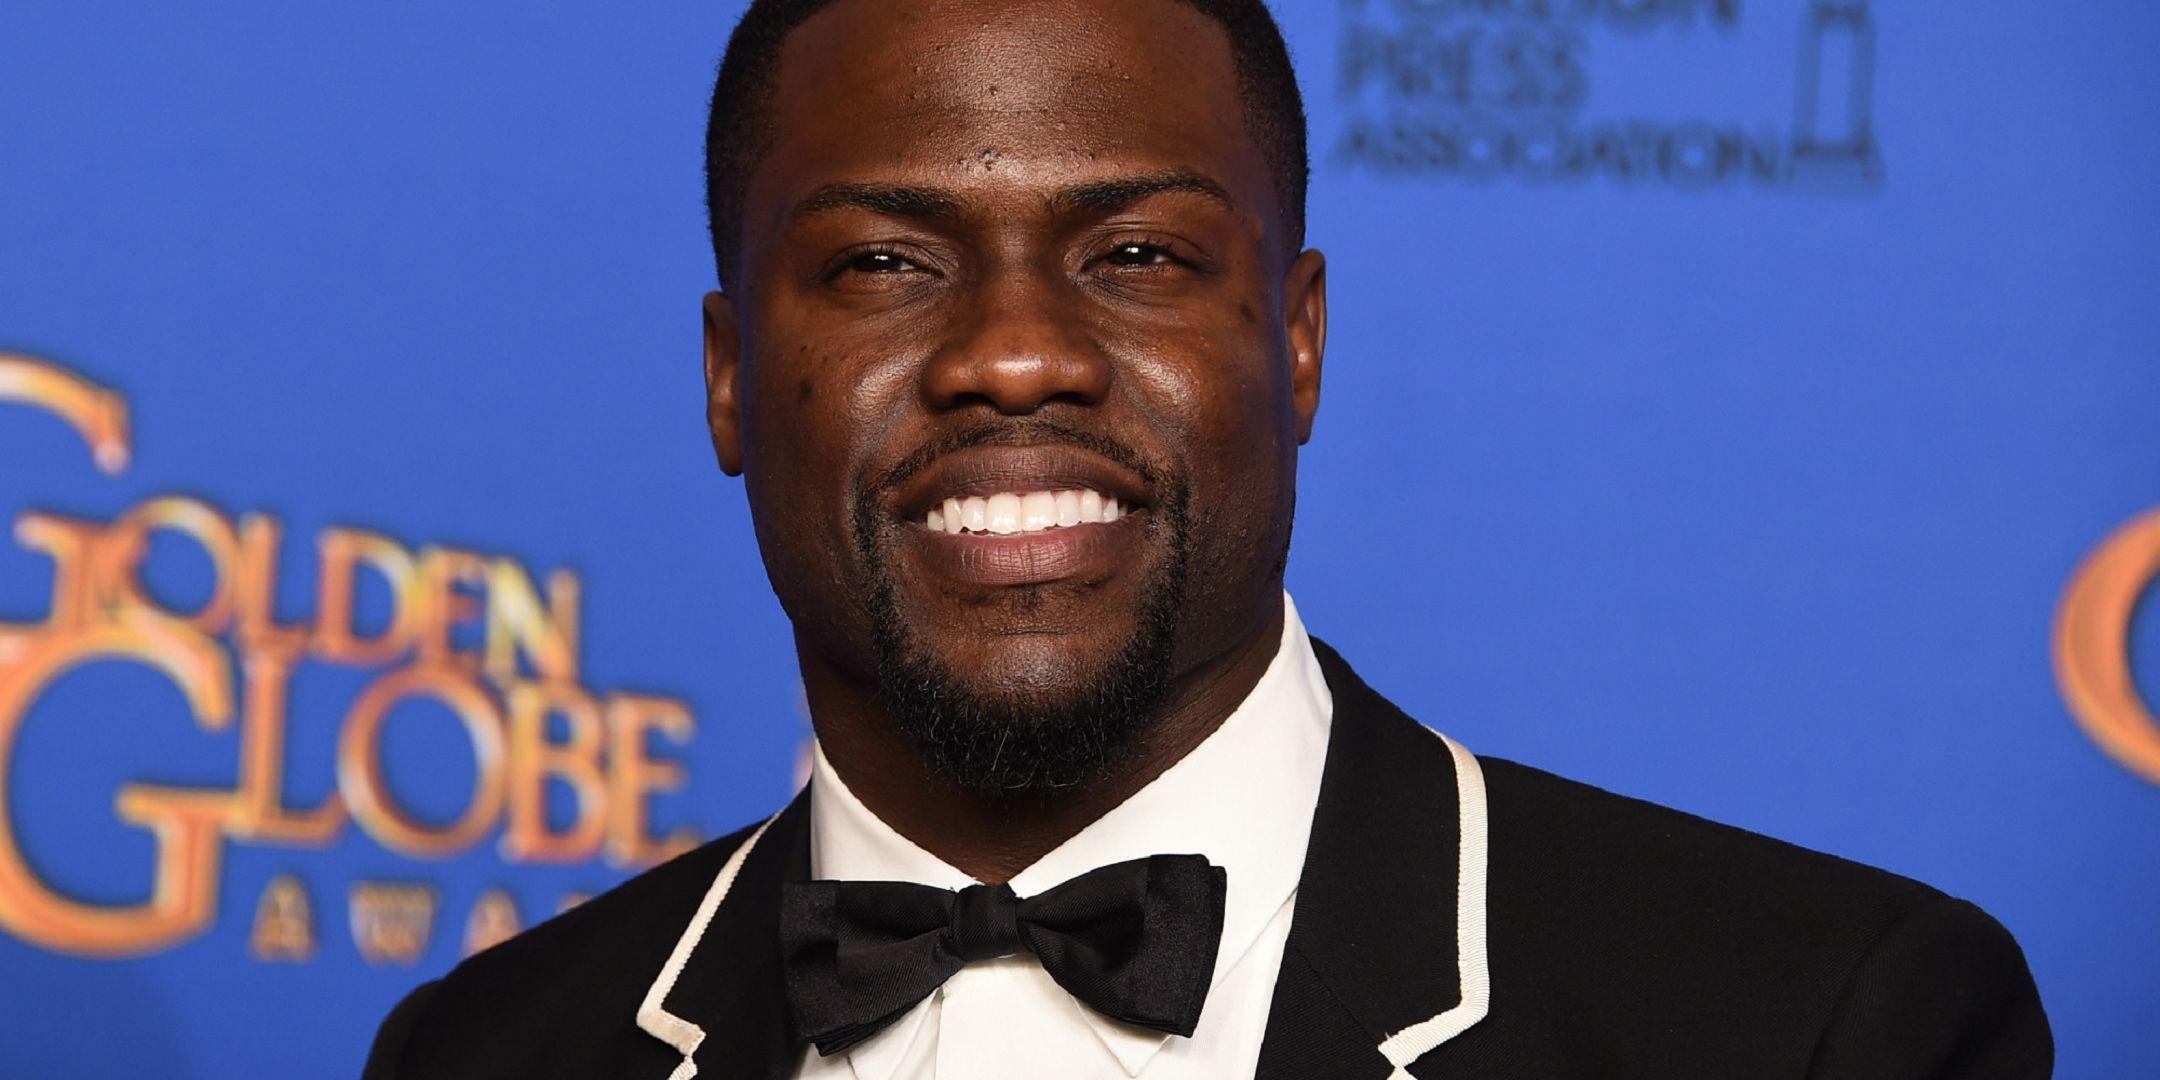 Kevin Hart Wallpaper Image Photo Picture Background